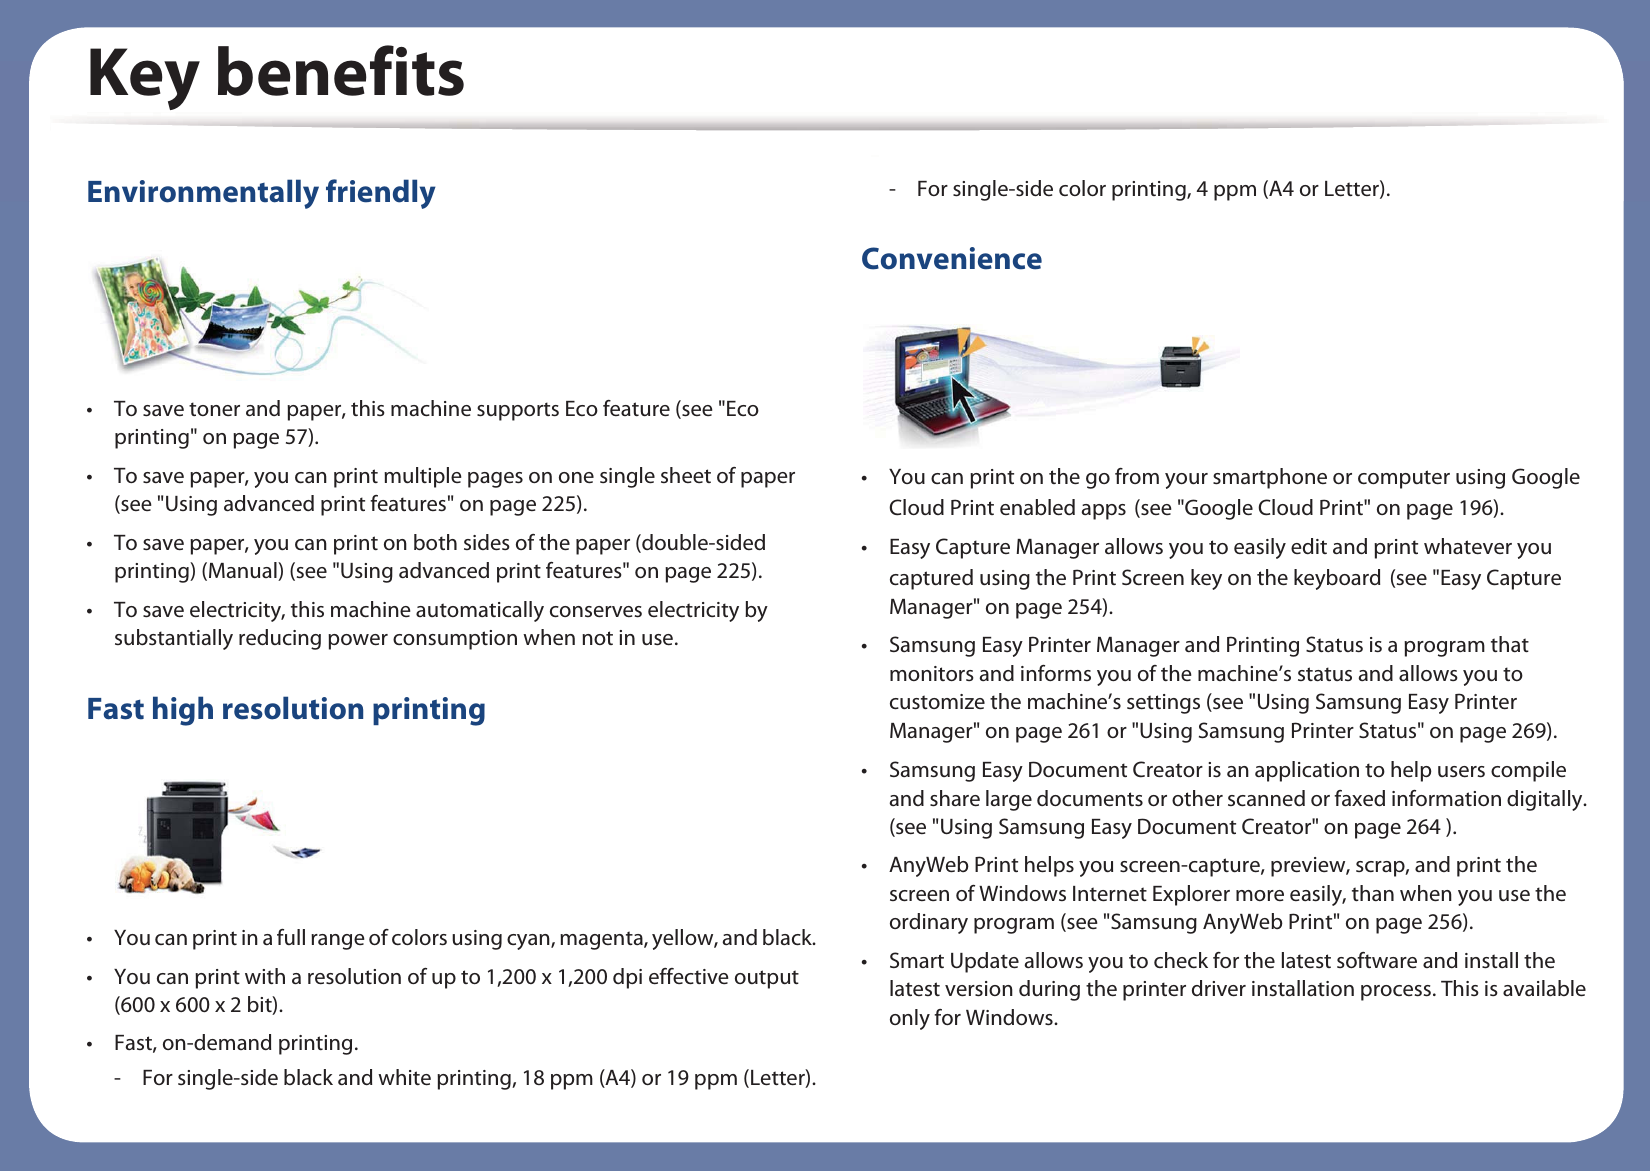 Key benefitsEnvironmentally friendly• To save toner and paper, this machine supports Eco feature (see &quot;Eco printing&quot; on page 57).• To save paper, you can print multiple pages on one single sheet of paper (see &quot;Using advanced print features&quot; on page 225).• To save paper, you can print on both sides of the paper (double-sided printing) (Manual) (see &quot;Using advanced print features&quot; on page 225).• To save electricity, this machine automatically conserves electricity by substantially reducing power consumption when not in use.Fast high resolution printing• You can print in a full range of colors using cyan, magenta, yellow, and black.• You can print with a resolution of up to 1,200 x 1,200 dpi effective output (600 x 600 x 2 bit).• Fast, on-demand printing.- For single-side black and white printing, 18 ppm (A4) or 19 ppm (Letter).- For single-side color printing, 4 ppm (A4 or Letter).Convenience• You can print on the go from your smartphone or computer using Google Cloud Print enabled appsG(see &quot;Google Cloud Print&quot; on page 196).• Easy Capture Manager allows you to easily edit and print whatever you captured using the Print Screen key on the keyboardG(see &quot;Easy Capture Manager&quot; on page 254).• Samsung Easy Printer Manager and Printing Status is a program that monitors and informs you of the machine’s status and allows you to customize the machine’s settings (see &quot;Using Samsung Easy Printer Manager&quot; on page 261 or &quot;Using Samsung Printer Status&quot; on page 269).• Samsung Easy Document Creator is an application to help users compile and share large documents or other scanned or faxed information digitally. (see &quot;Using Samsung Easy Document Creator&quot; on page 264 ).• AnyWeb Print helps you screen-capture, preview, scrap, and print the screen of Windows Internet Explorer more easily, than when you use the ordinary program (see &quot;Samsung AnyWeb Print&quot; on page 256).• Smart Update allows you to check for the latest software and install the latest version during the printer driver installation process. This is available only for Windows.